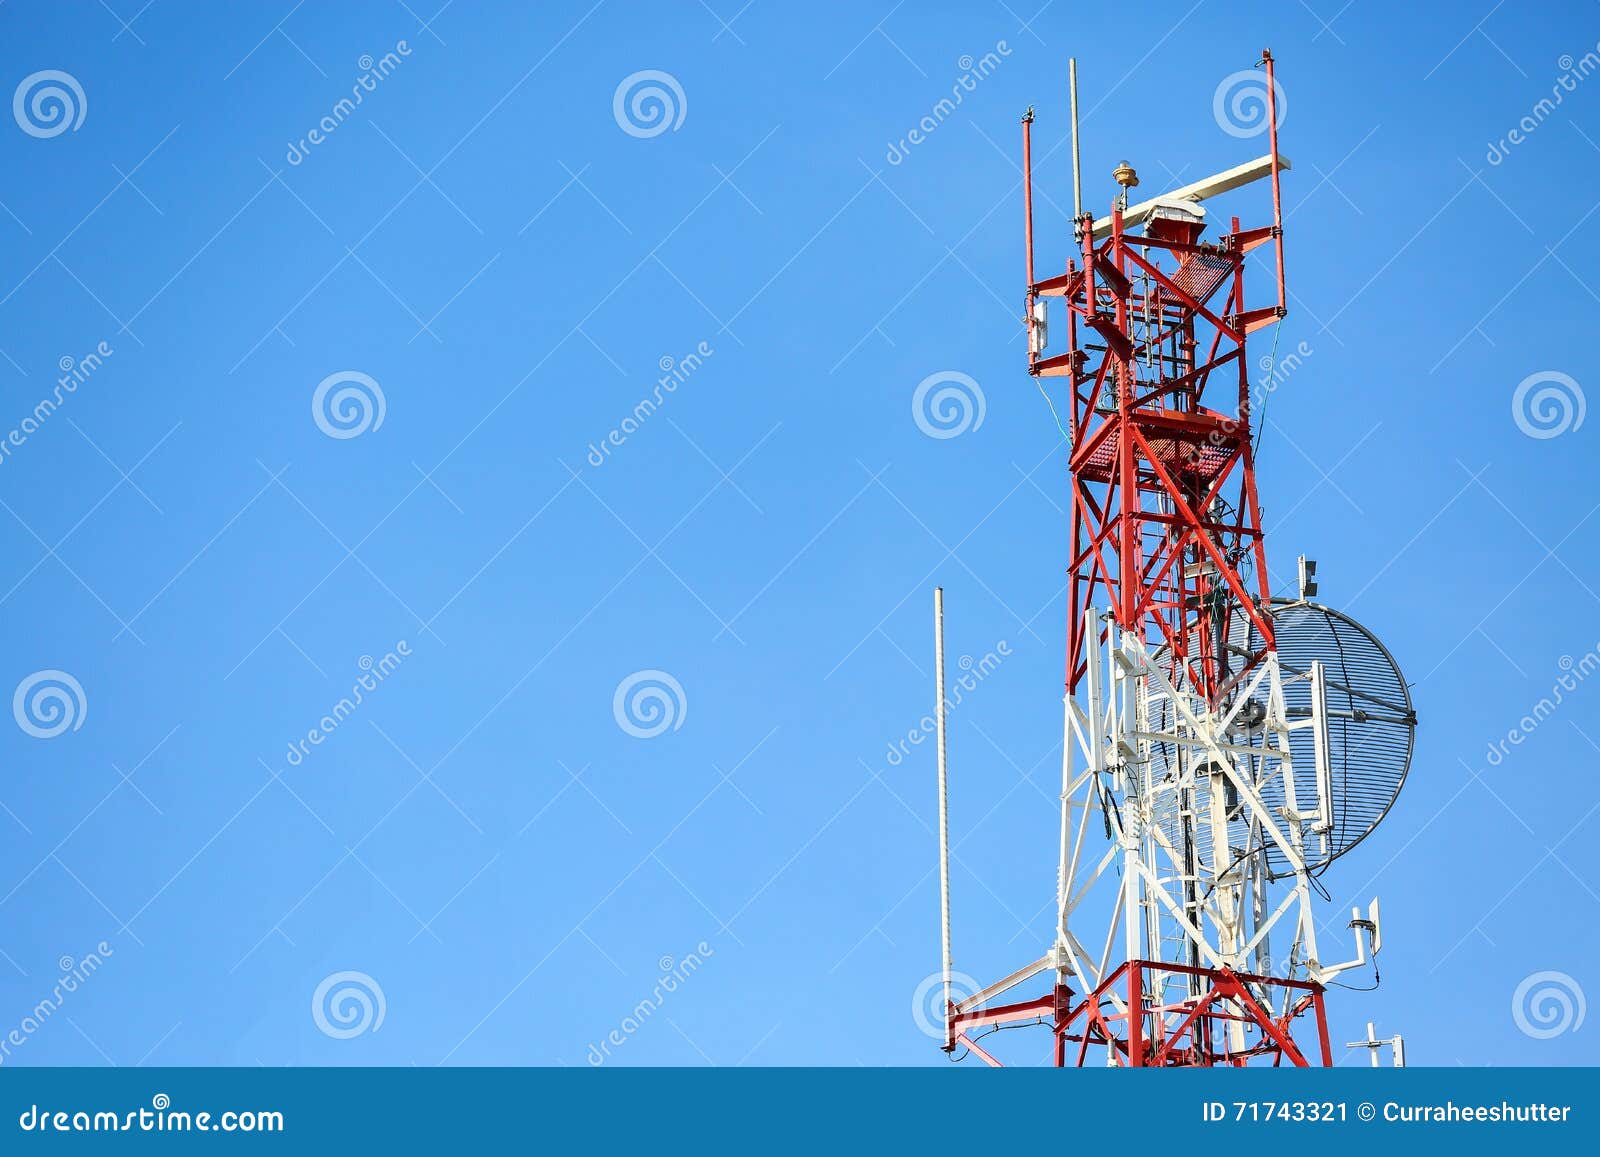 telecom tower install communication equipment for sent signal to the city, satellite dish telecom network in the city